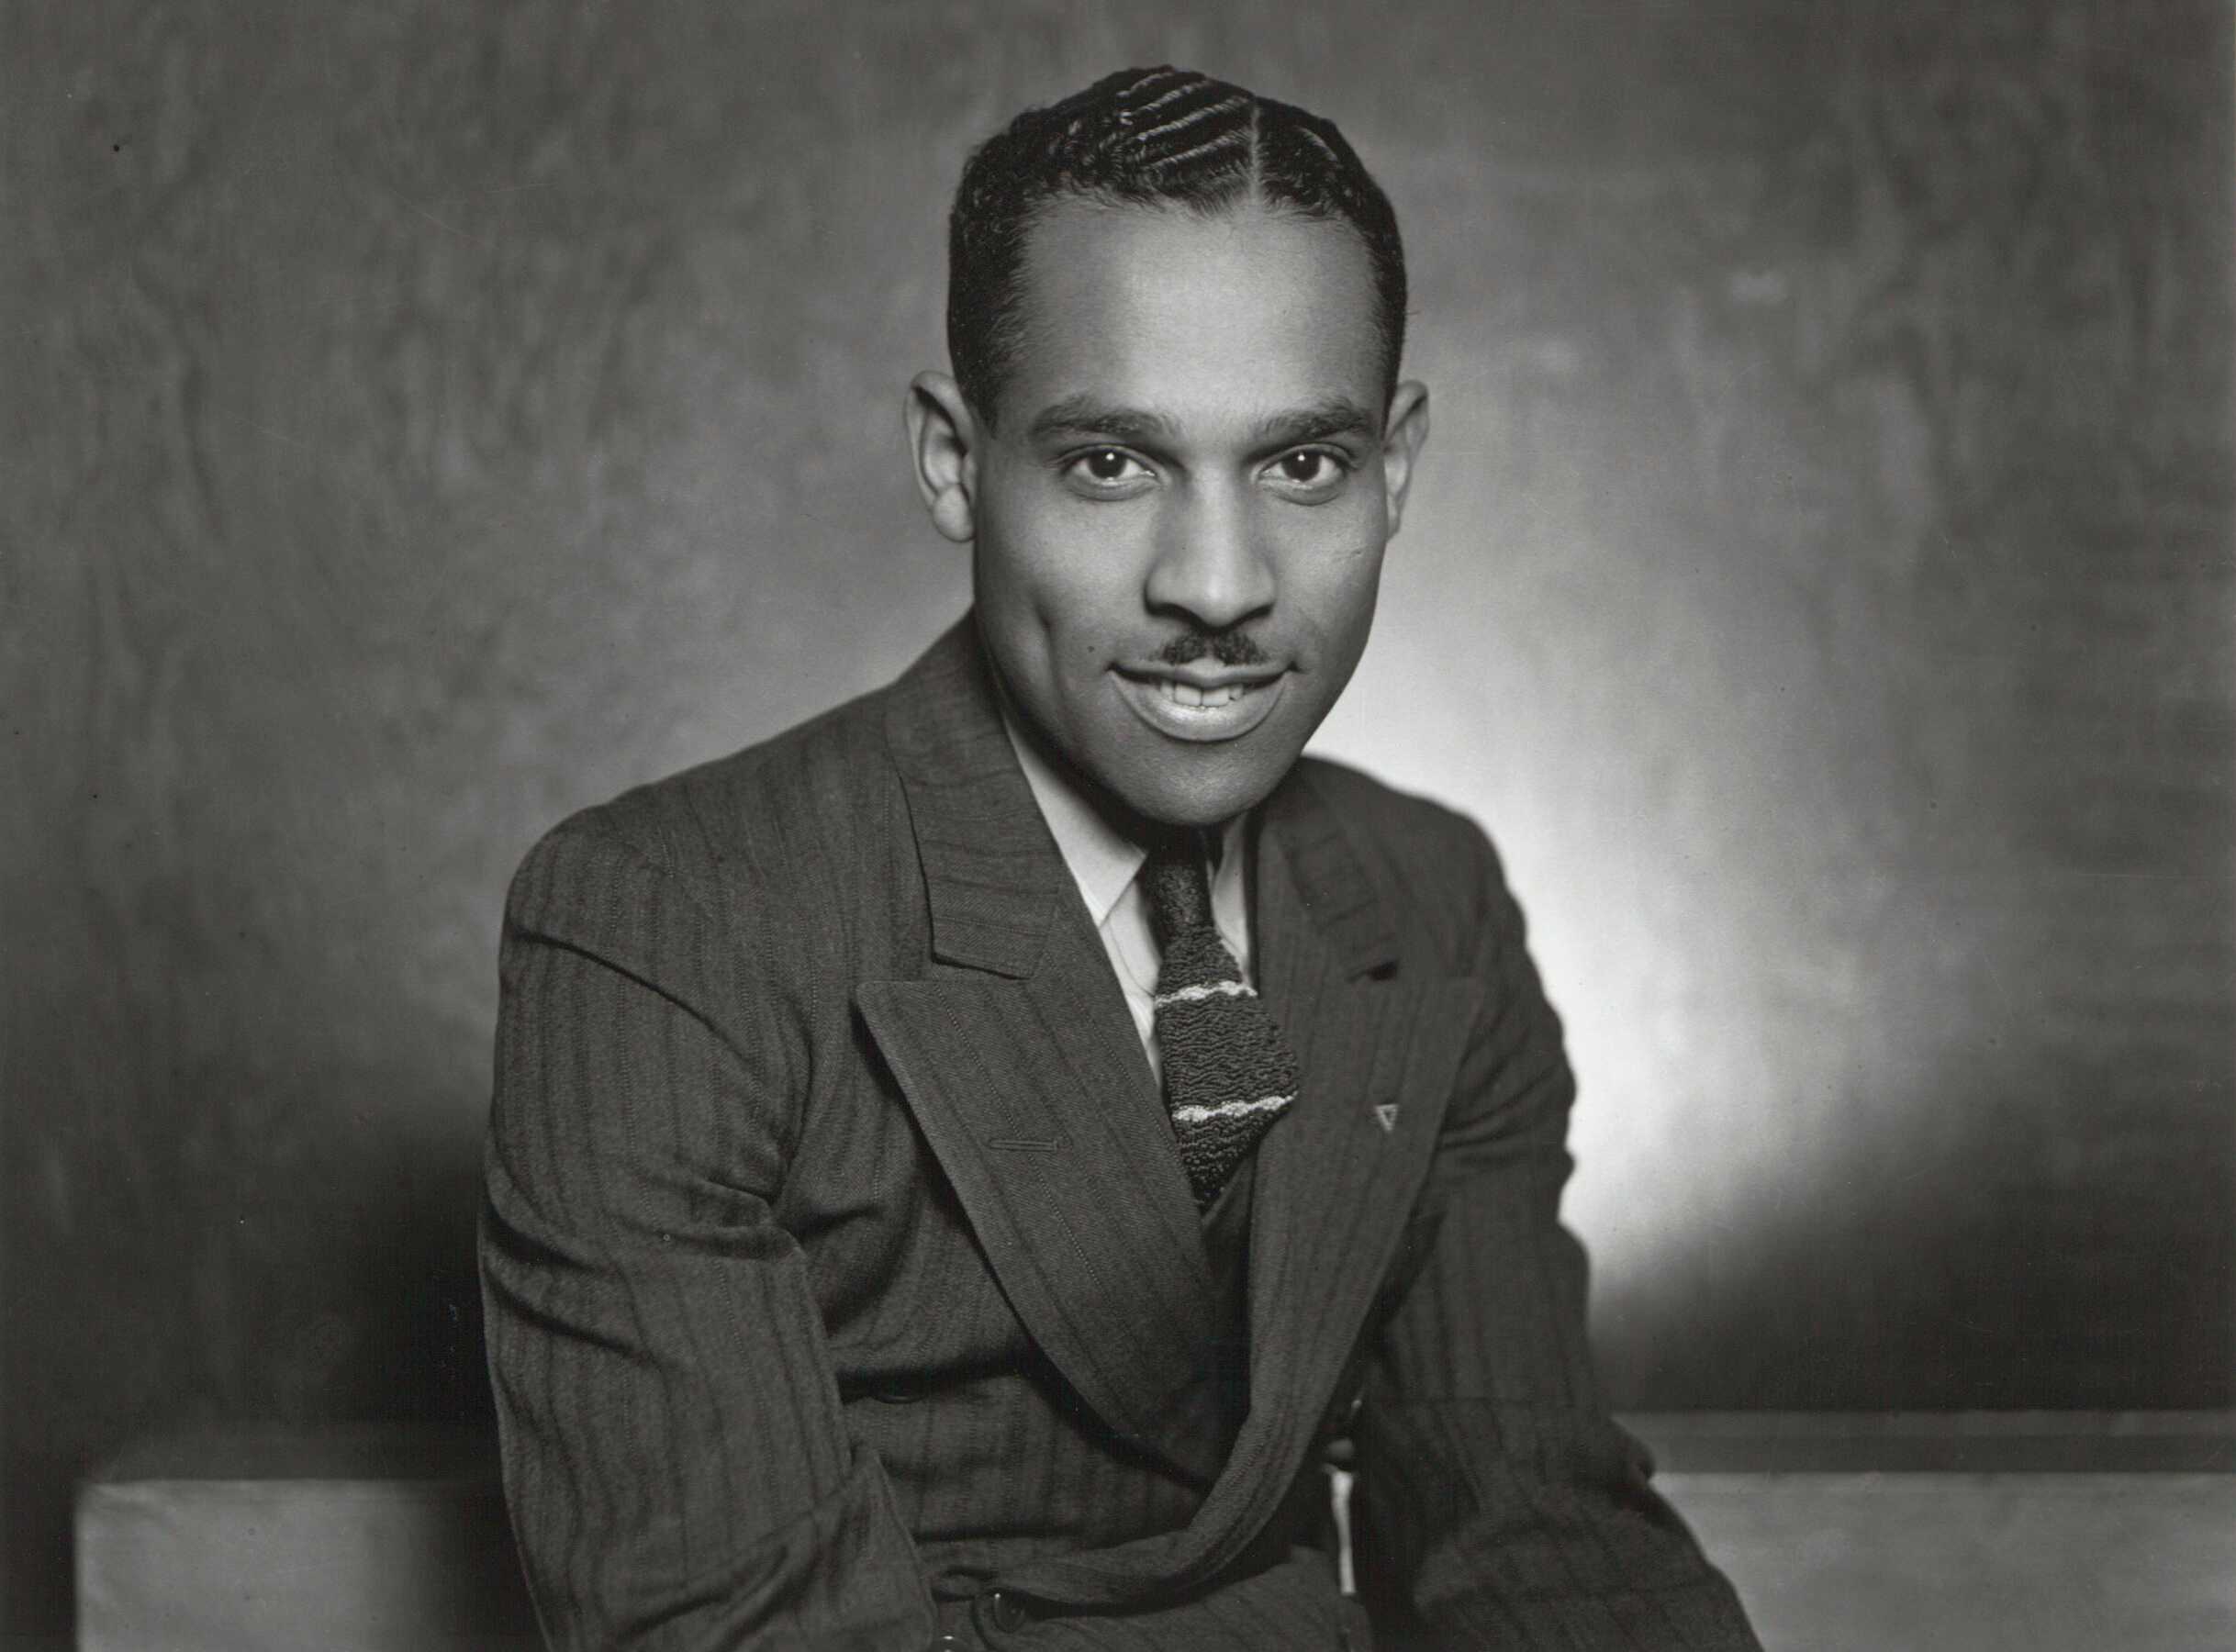 A black and white photograph of Charles "Teenie" Harris. This self-portrait pictures Harris from the waist up, seated in his photography studio, wearing a striped suit.